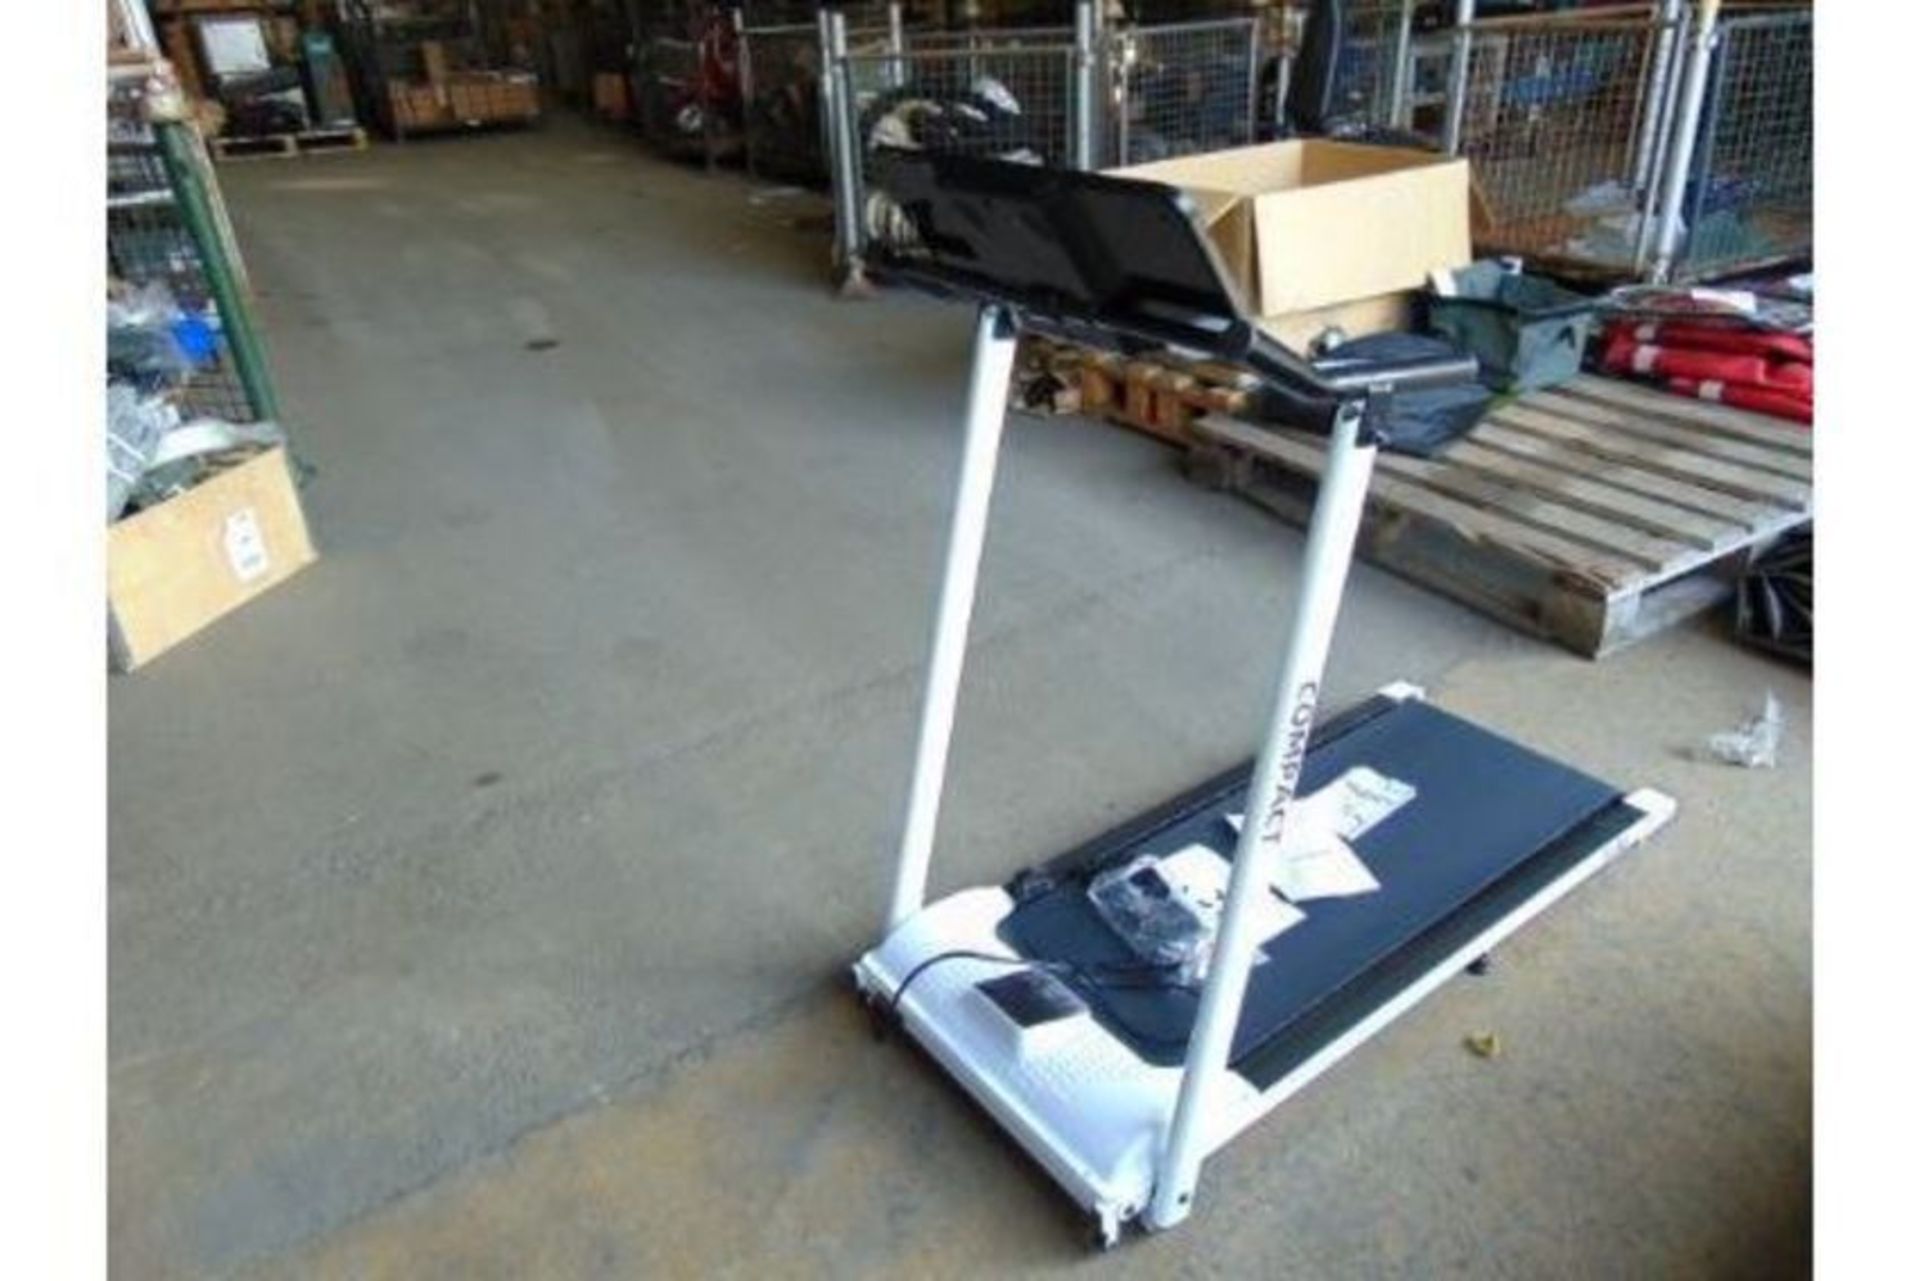 New Unused Compact 240 volt Fold up Tread Mill with Digital Controls, Programs, etc - Image 2 of 10